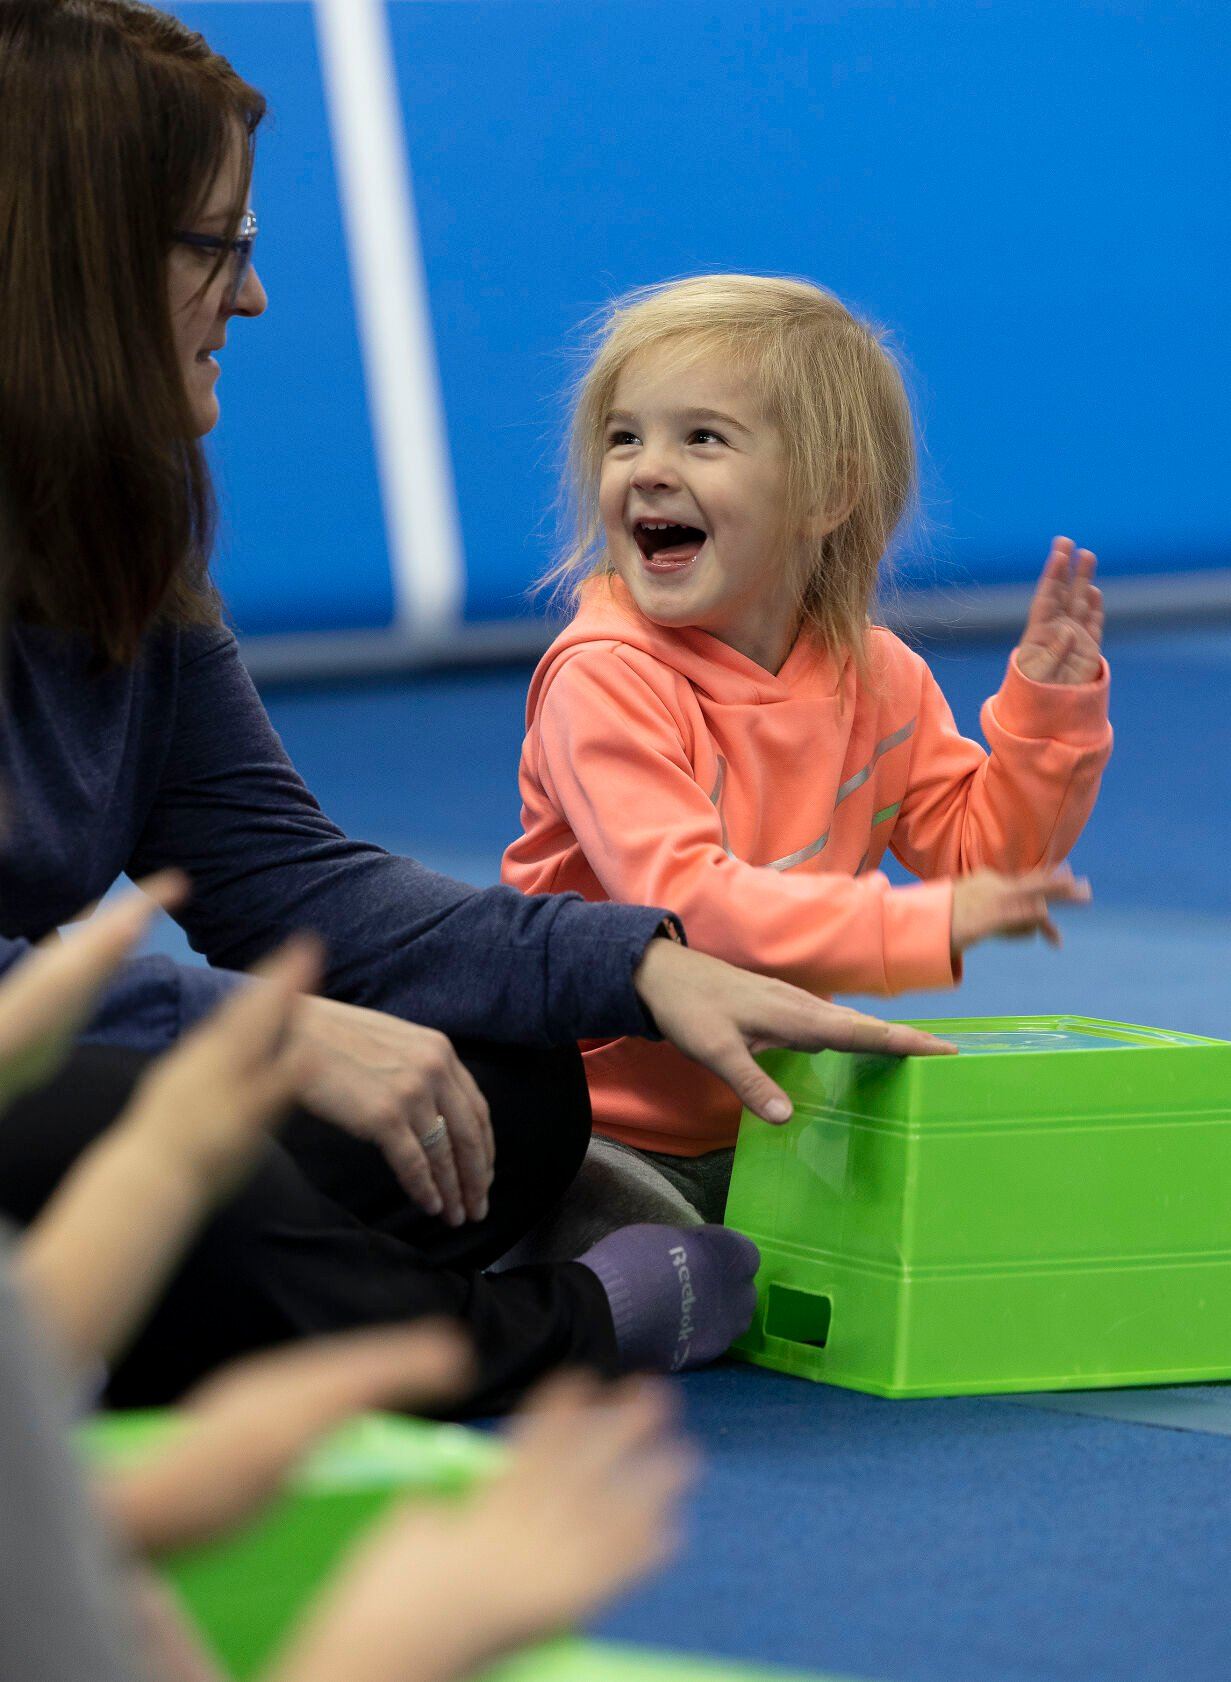 Marissa Tyson, 3, drums on a container as she looks at her mom, Nicole, during a Mommy and Me Music Class at Badger Elite Athletics in Shullsburg, Wis.    PHOTO CREDIT: Stephen Gassman, Telegraph Herald